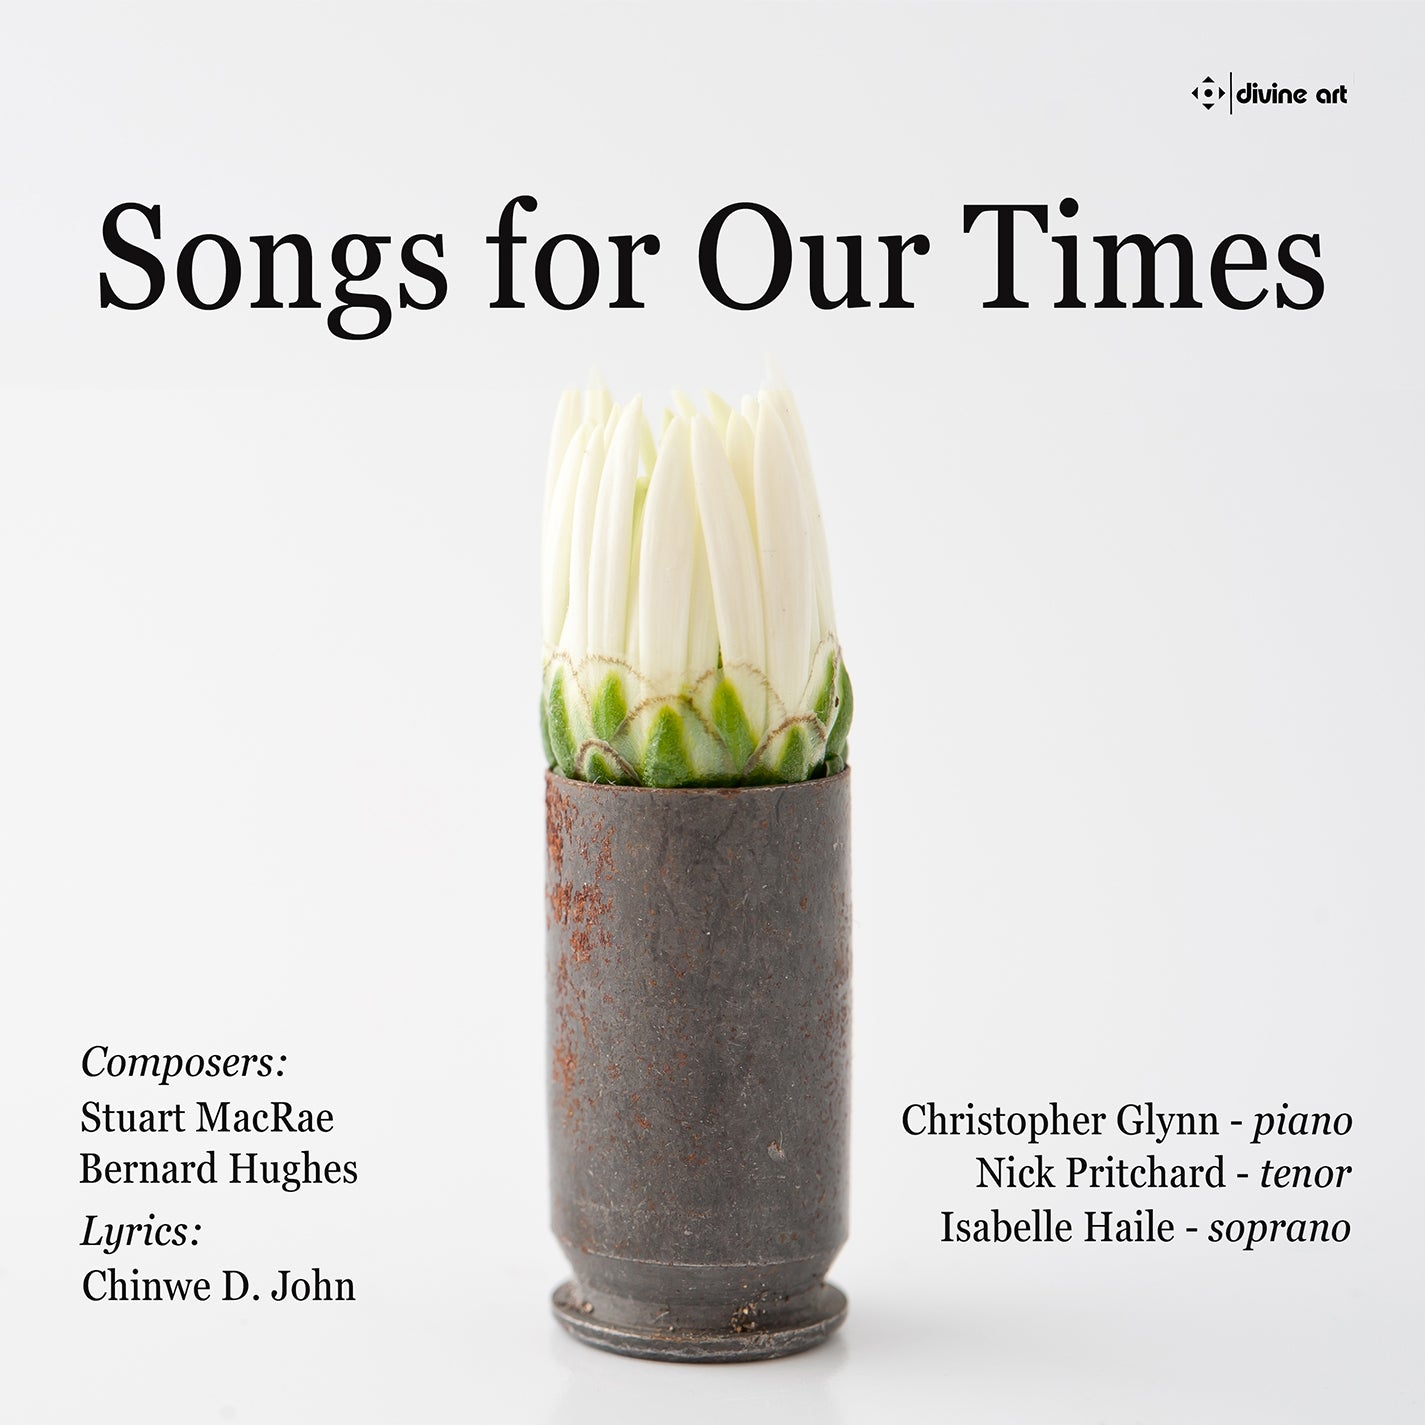 Songs for Our Times / Glynn, Pritchard, Haile